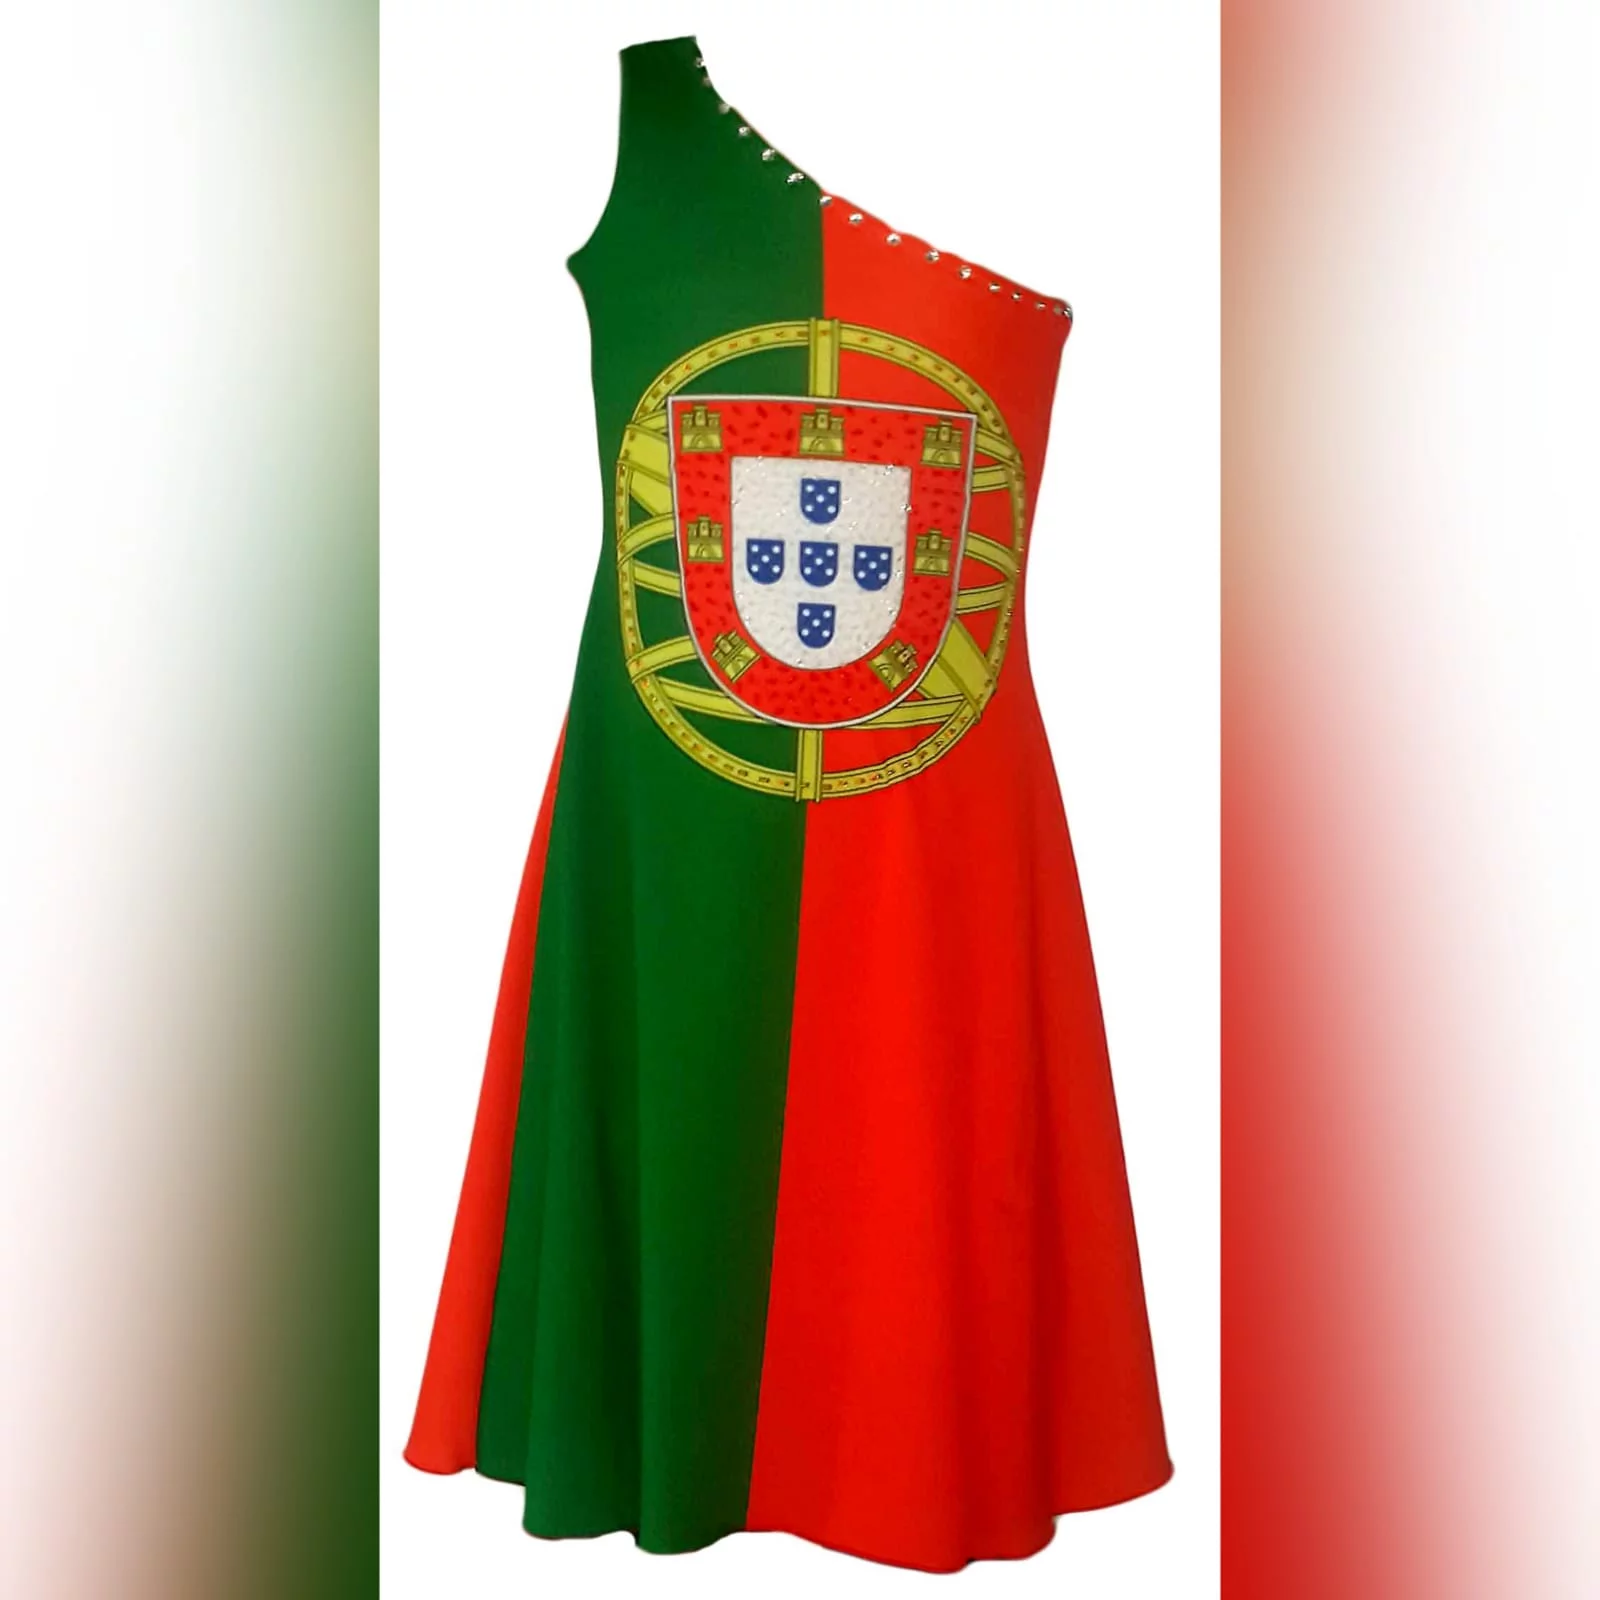 Portuguese flag and south african flag dress 6 single shoulder dress with the portuguese flag in the front and the south african flag at the back. Bead detailing on the front and the back. Worn for heritage day. She won a prize for best dressed.